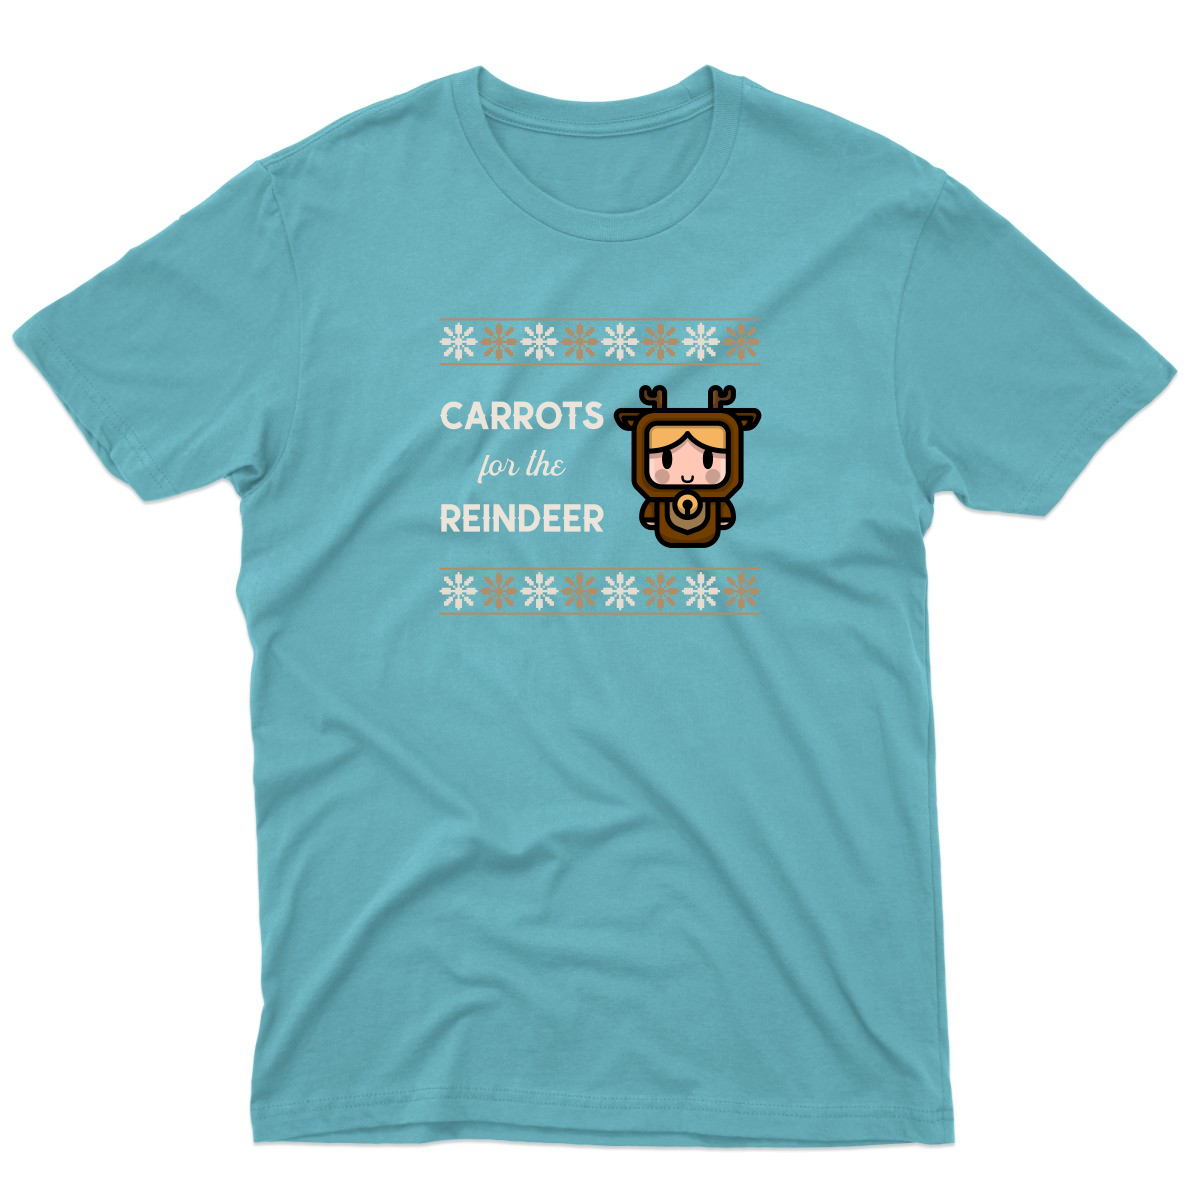 Carrots for the Reindeer Men's T-shirt | Turquoise